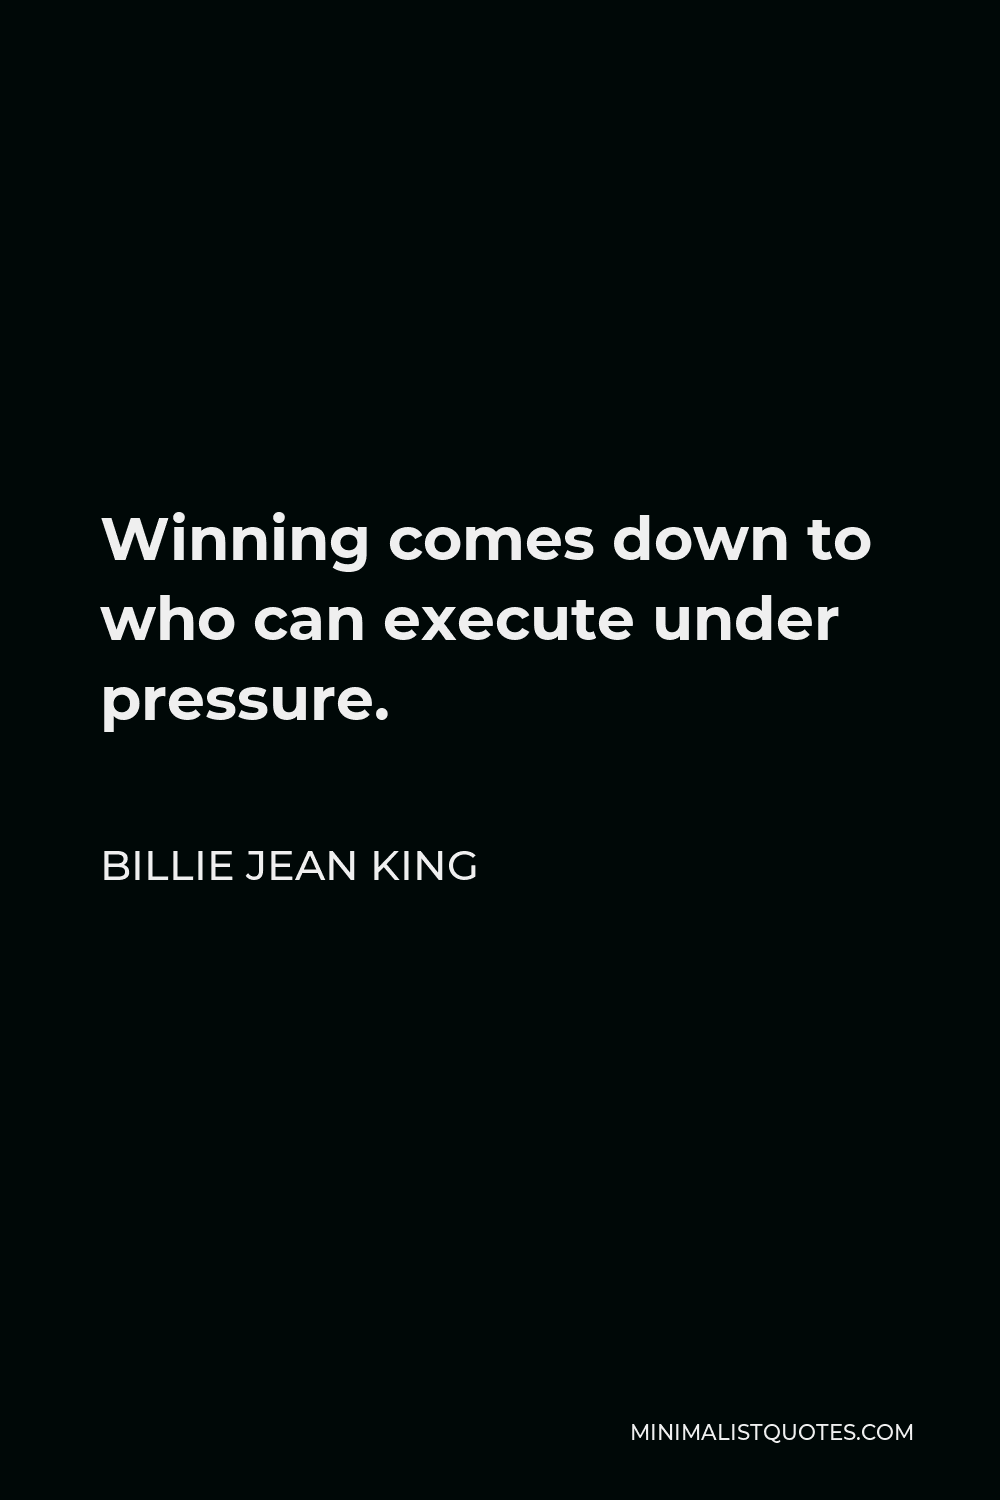 Billie Jean King Quote - Winning comes down to who can execute under pressure.